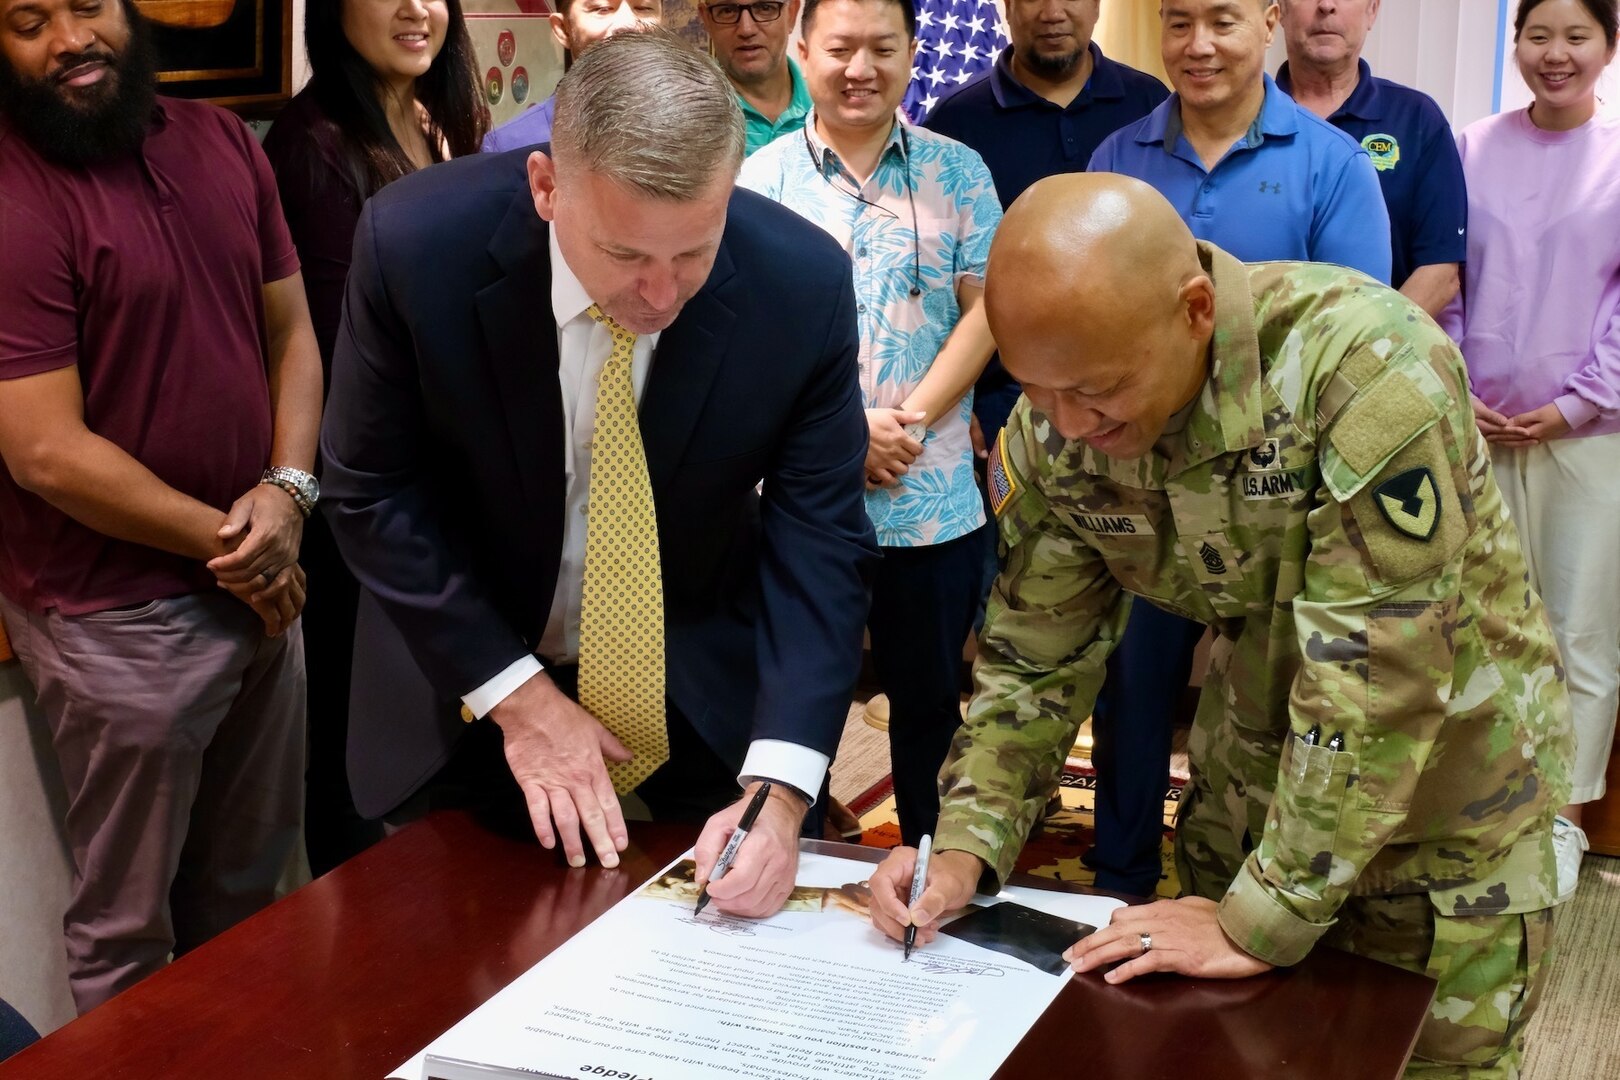 Installation Management Command-Pacific Reaffirms Commitment to Leadership, Teamwork